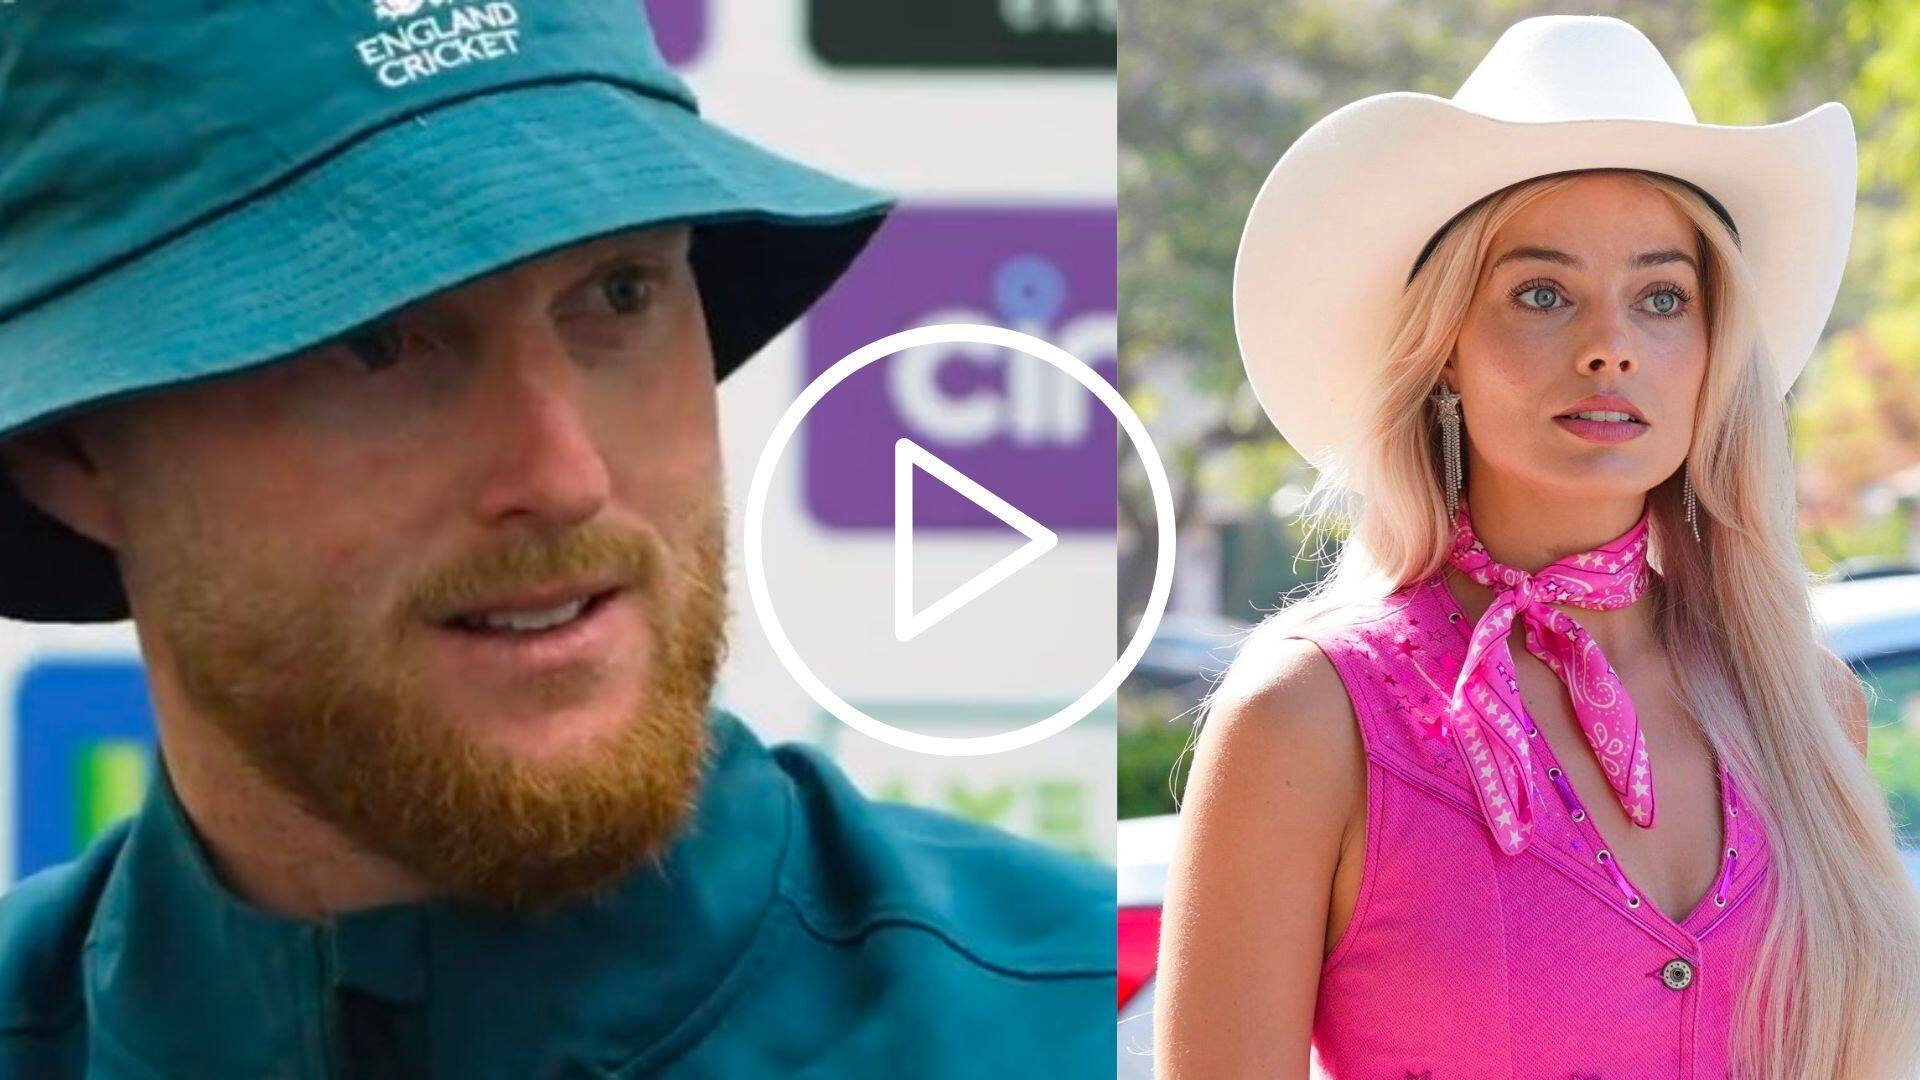 [Watch] Mark Wood, Ben Stokes Endorse Barbie Movie In Press Conference